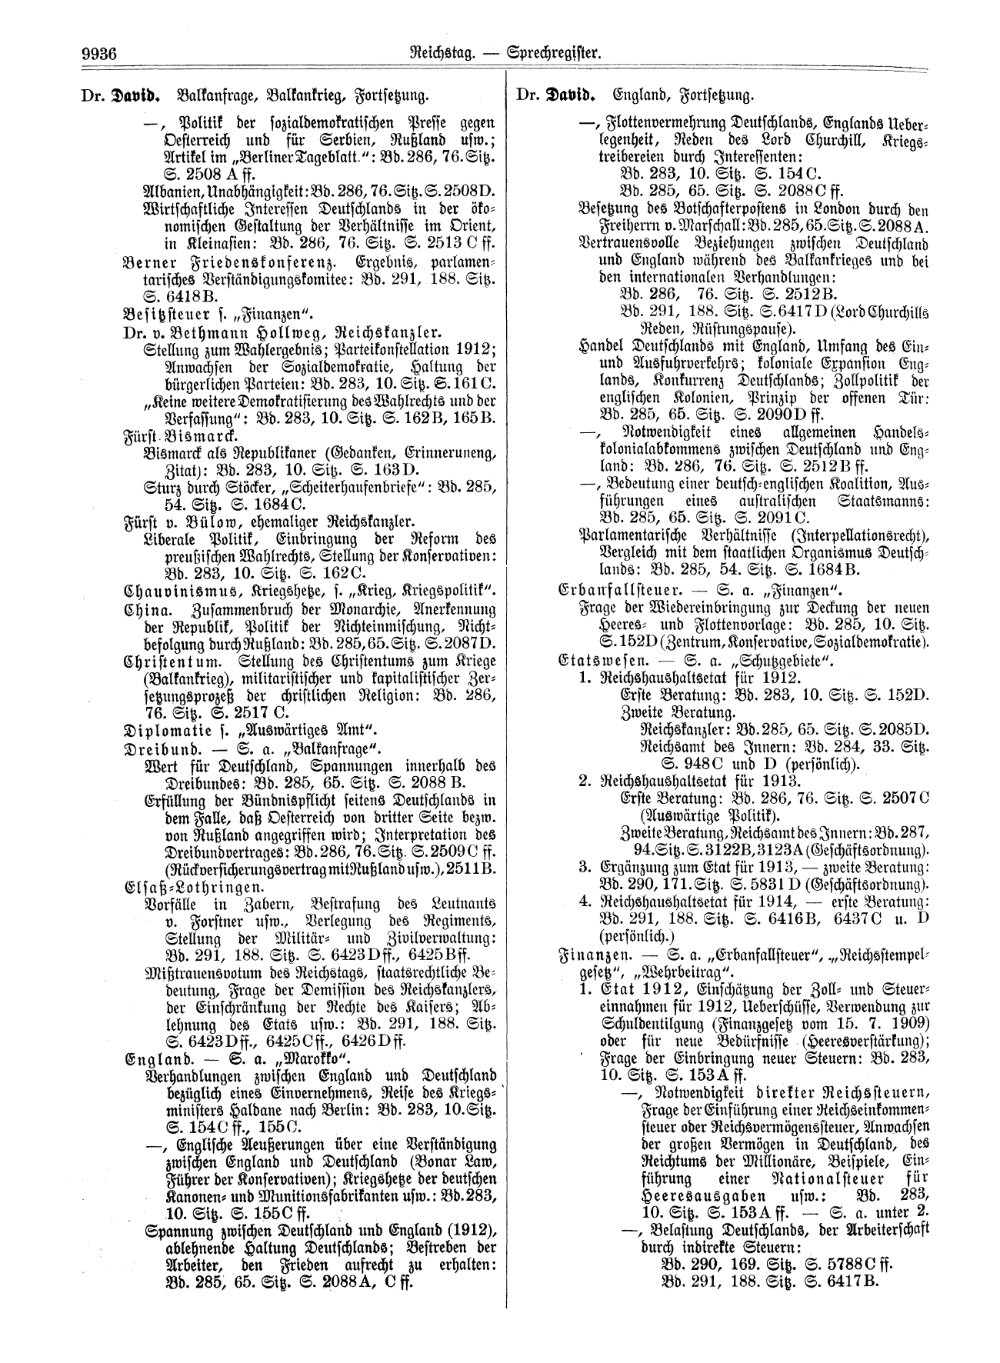 Scan of page 9936